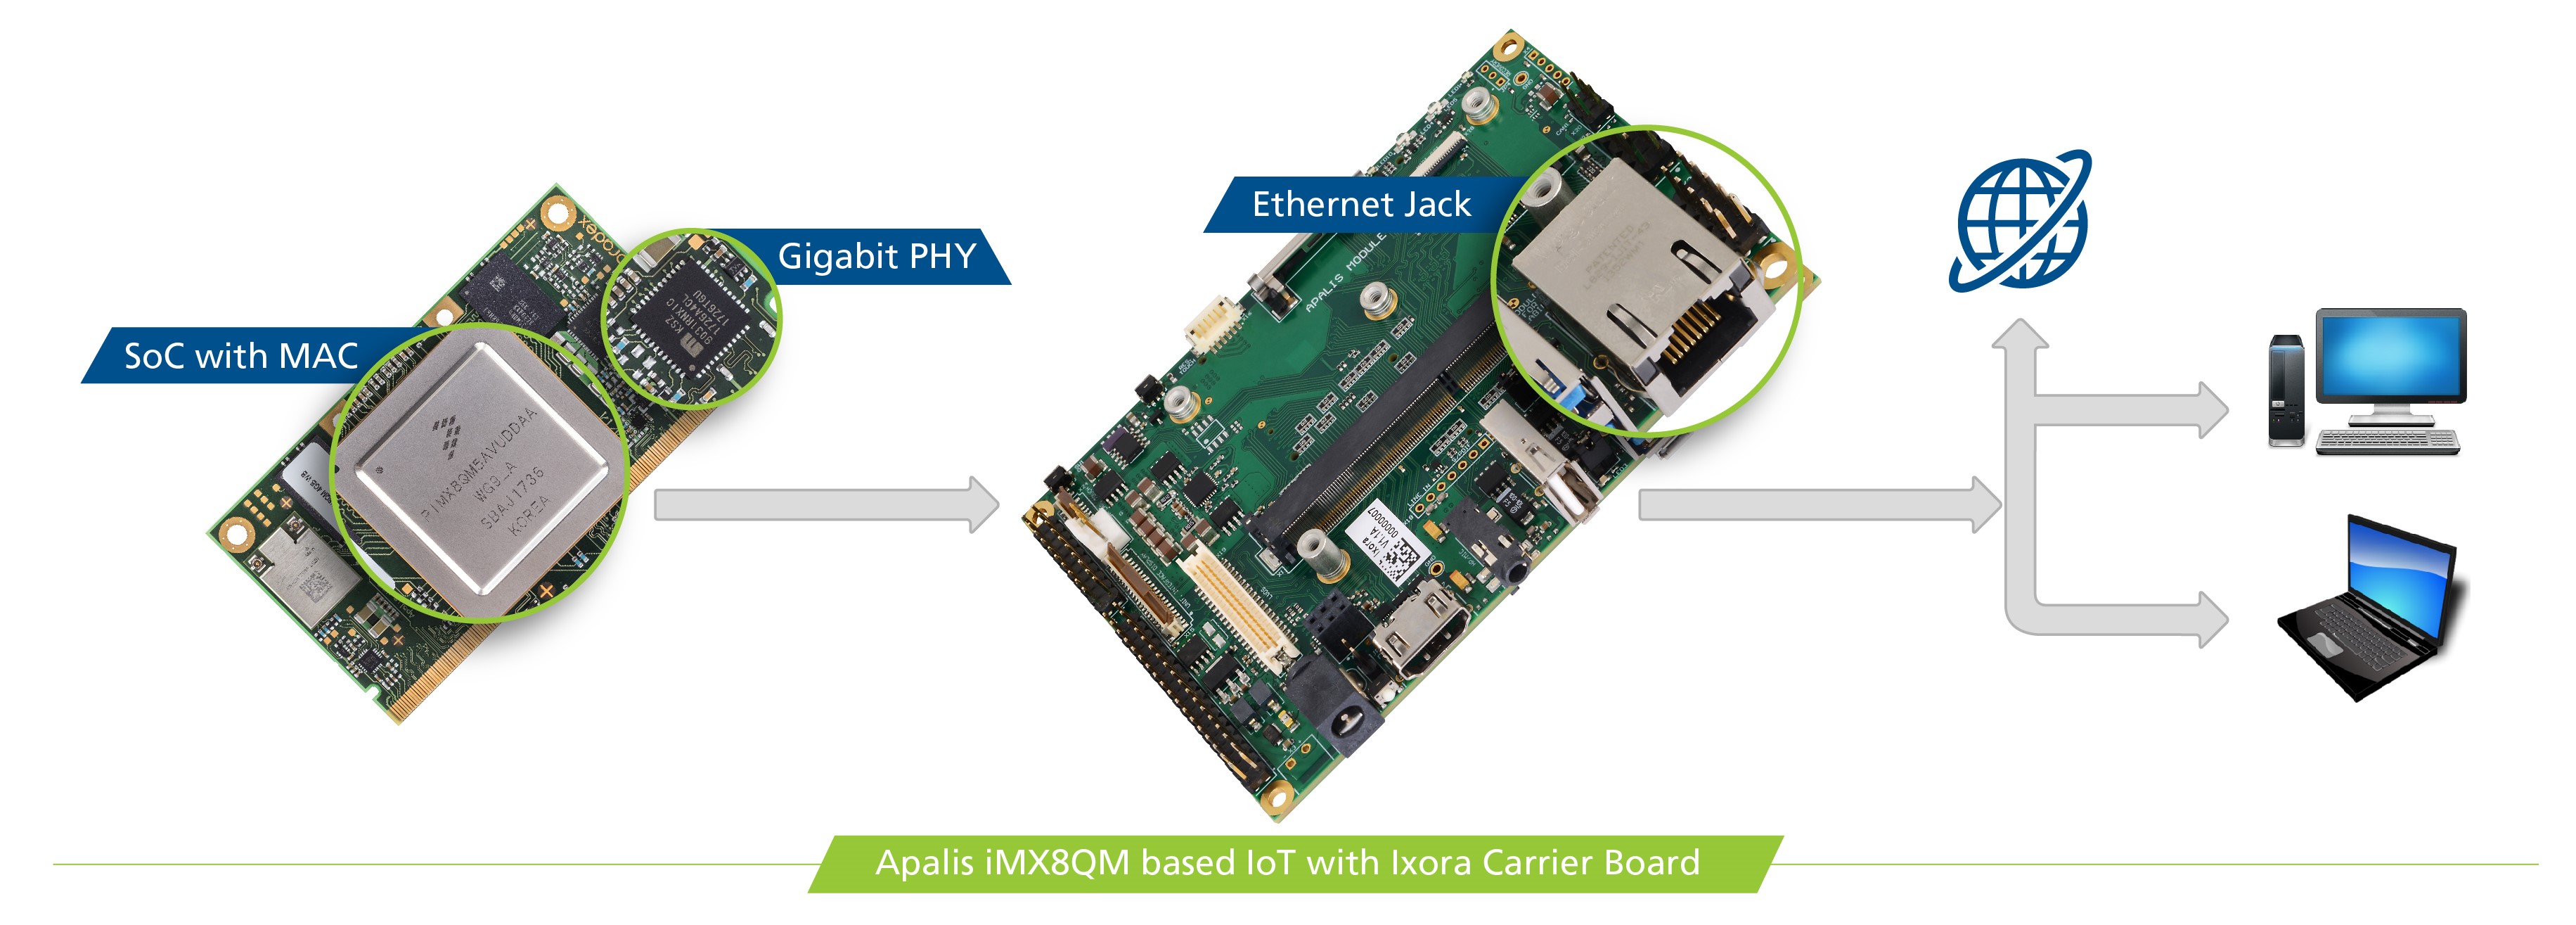 Apalis iMX8QM based IoT with Ixora Carrier Board